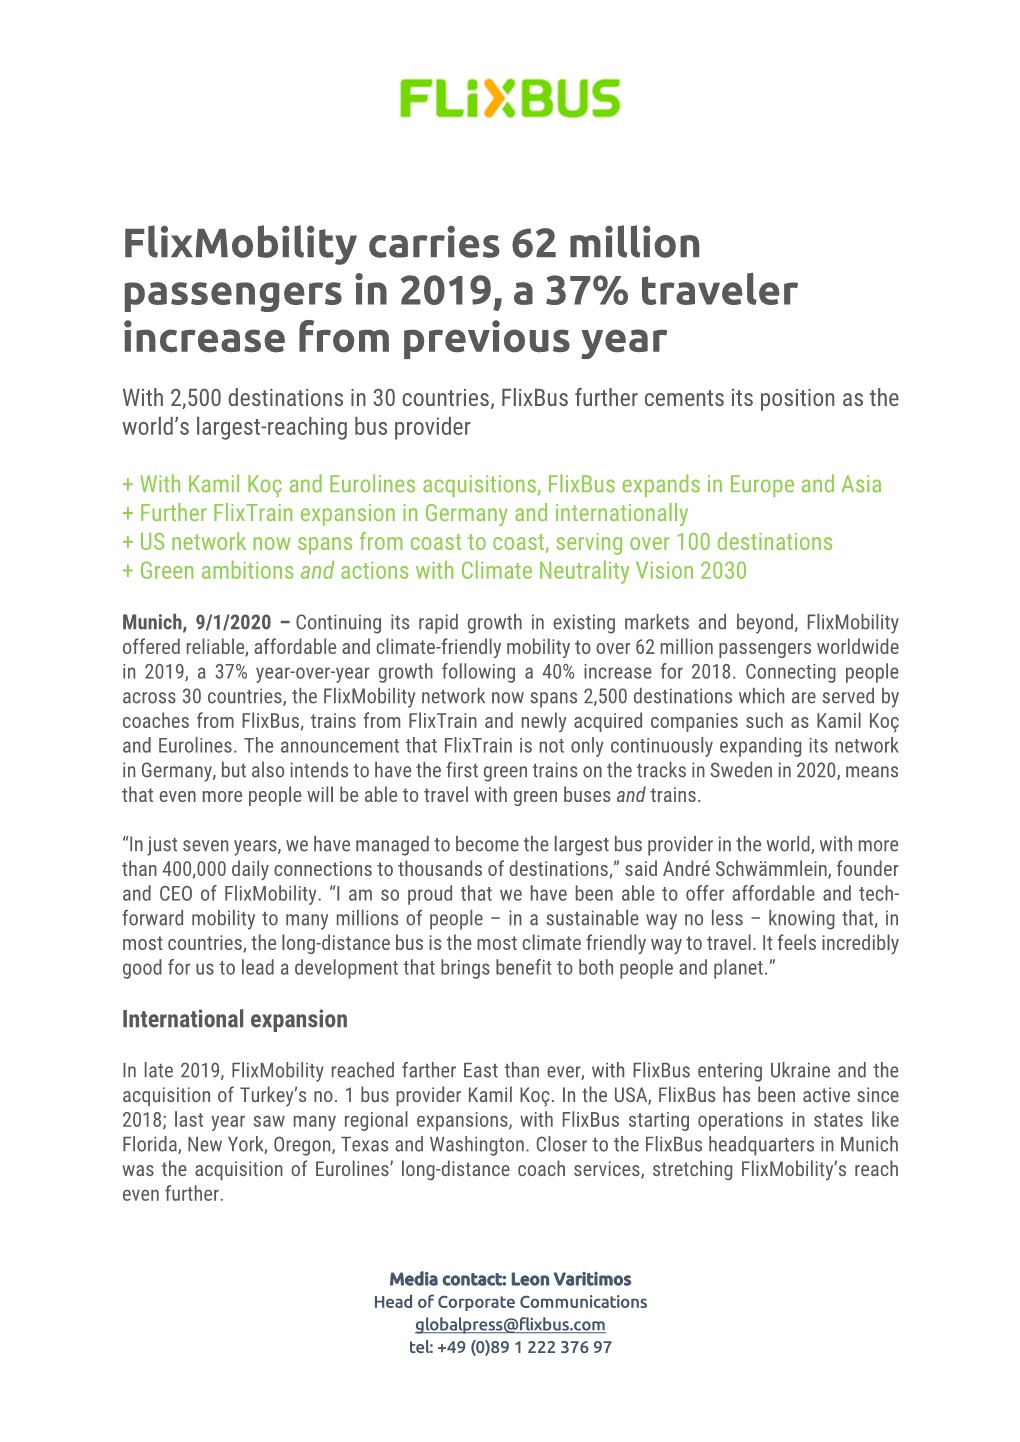 Flixmobility Carries 62 Million Passengers in 2019, a 37% Traveler Increase from Previous Year